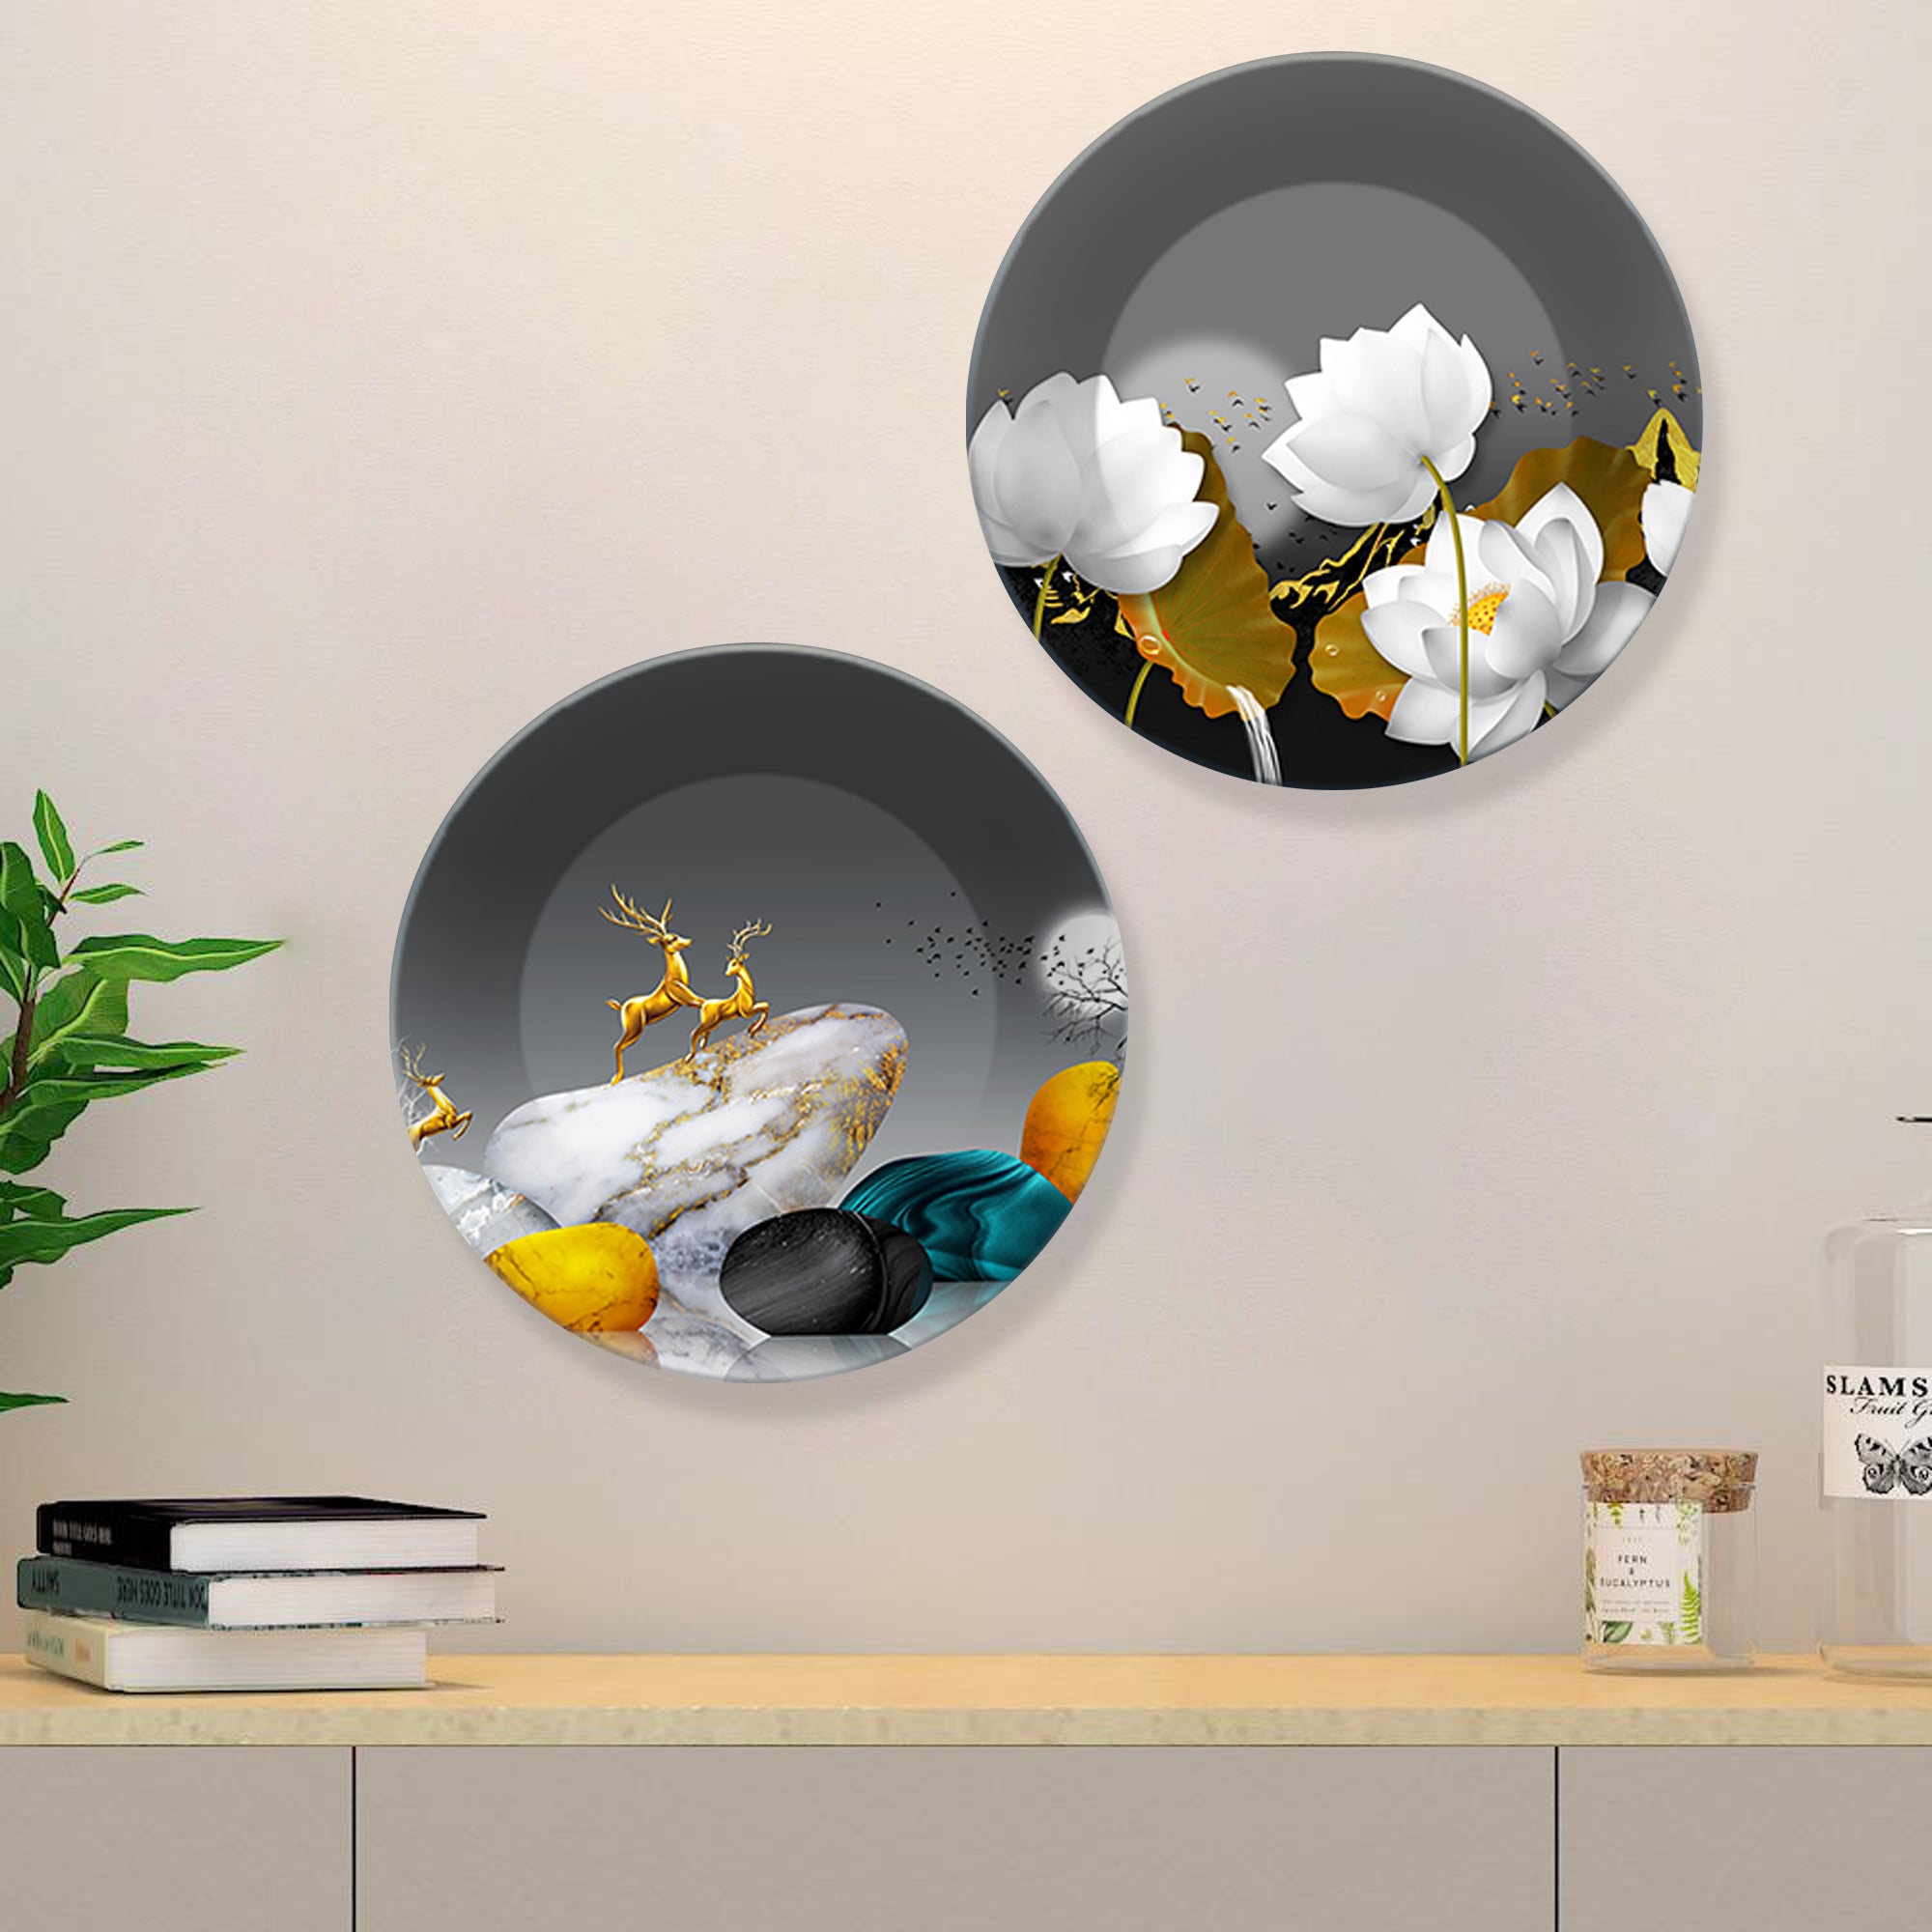 Flower and Deer Ceramic Wall Hanging Plates Set of Two